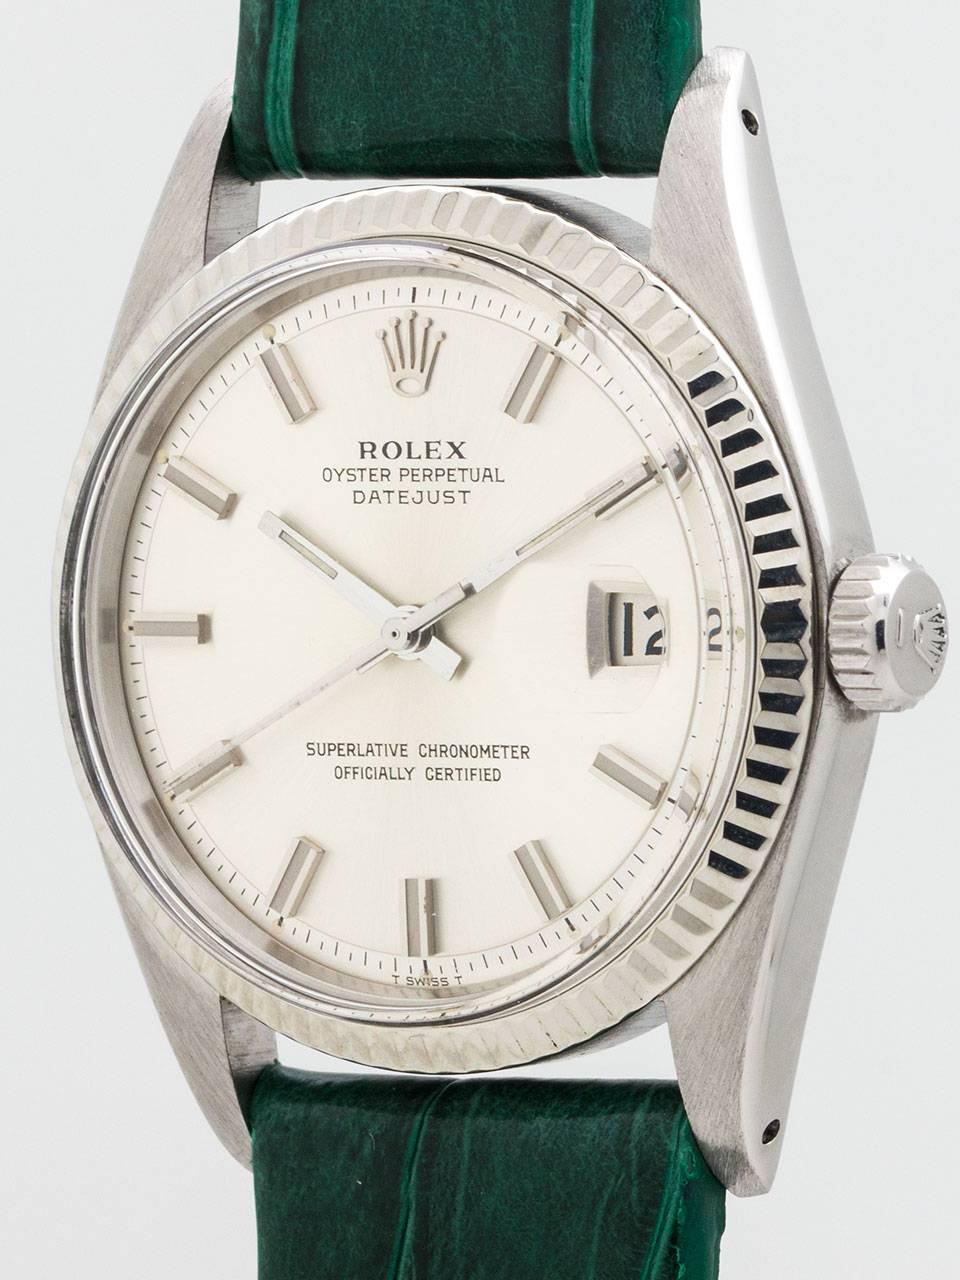 Rolex Stainless Steel Datejust Wristwatch Ref 1601 1974 In Excellent Condition For Sale In West Hollywood, CA